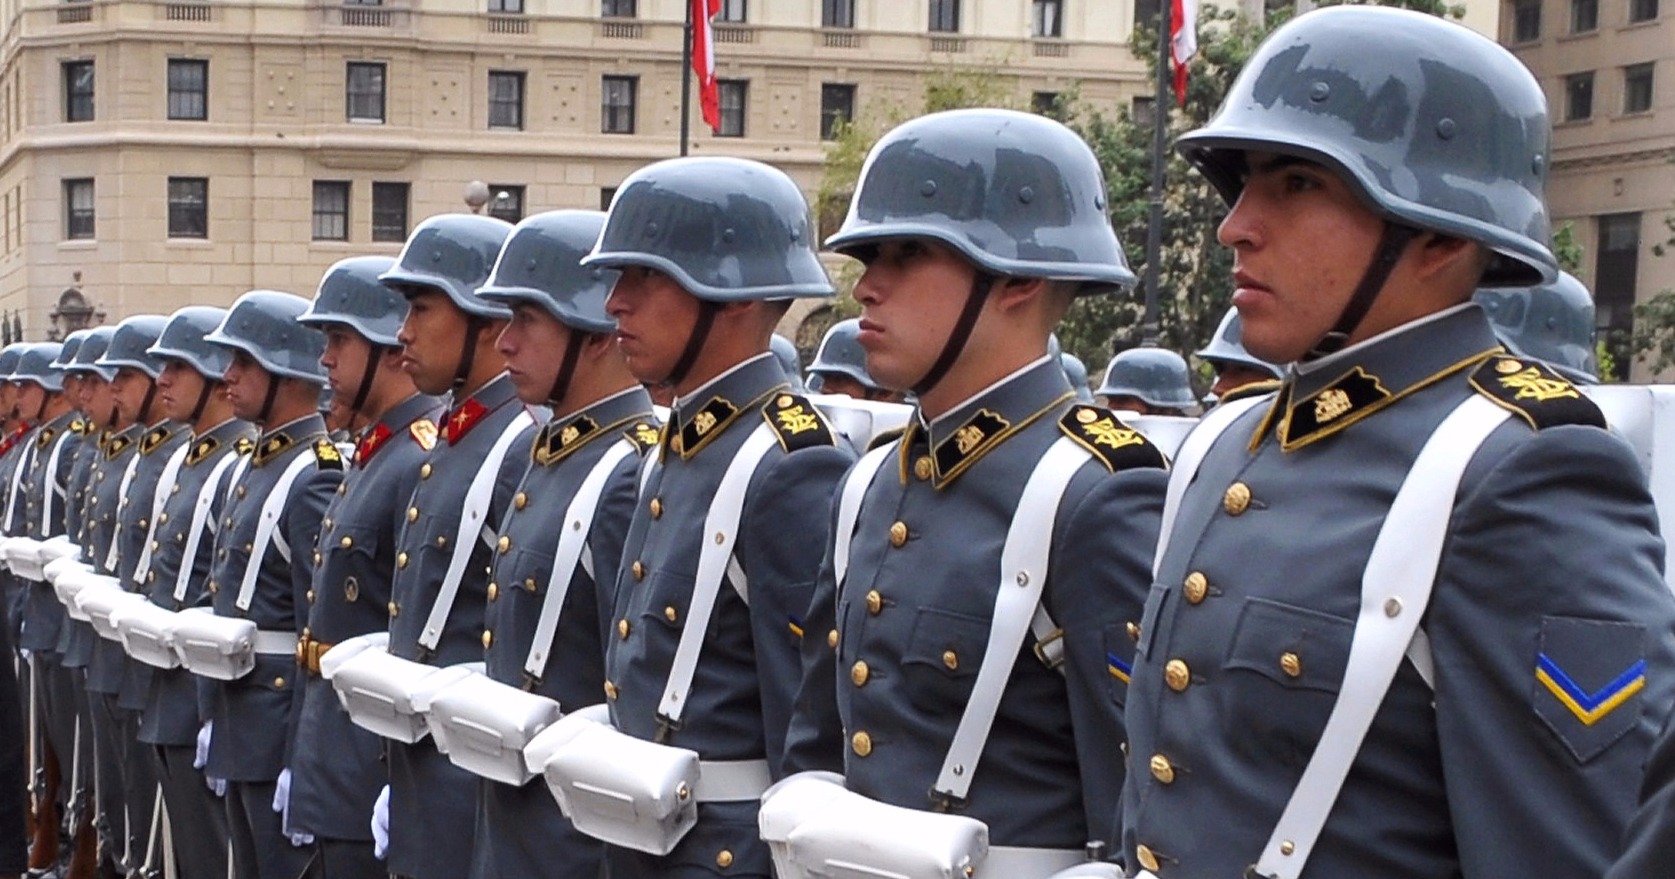 Army honor guard waiting at La Moneda Presidential Palace for a foreign dignitary's arrival in Santiago, Chile, 2009.